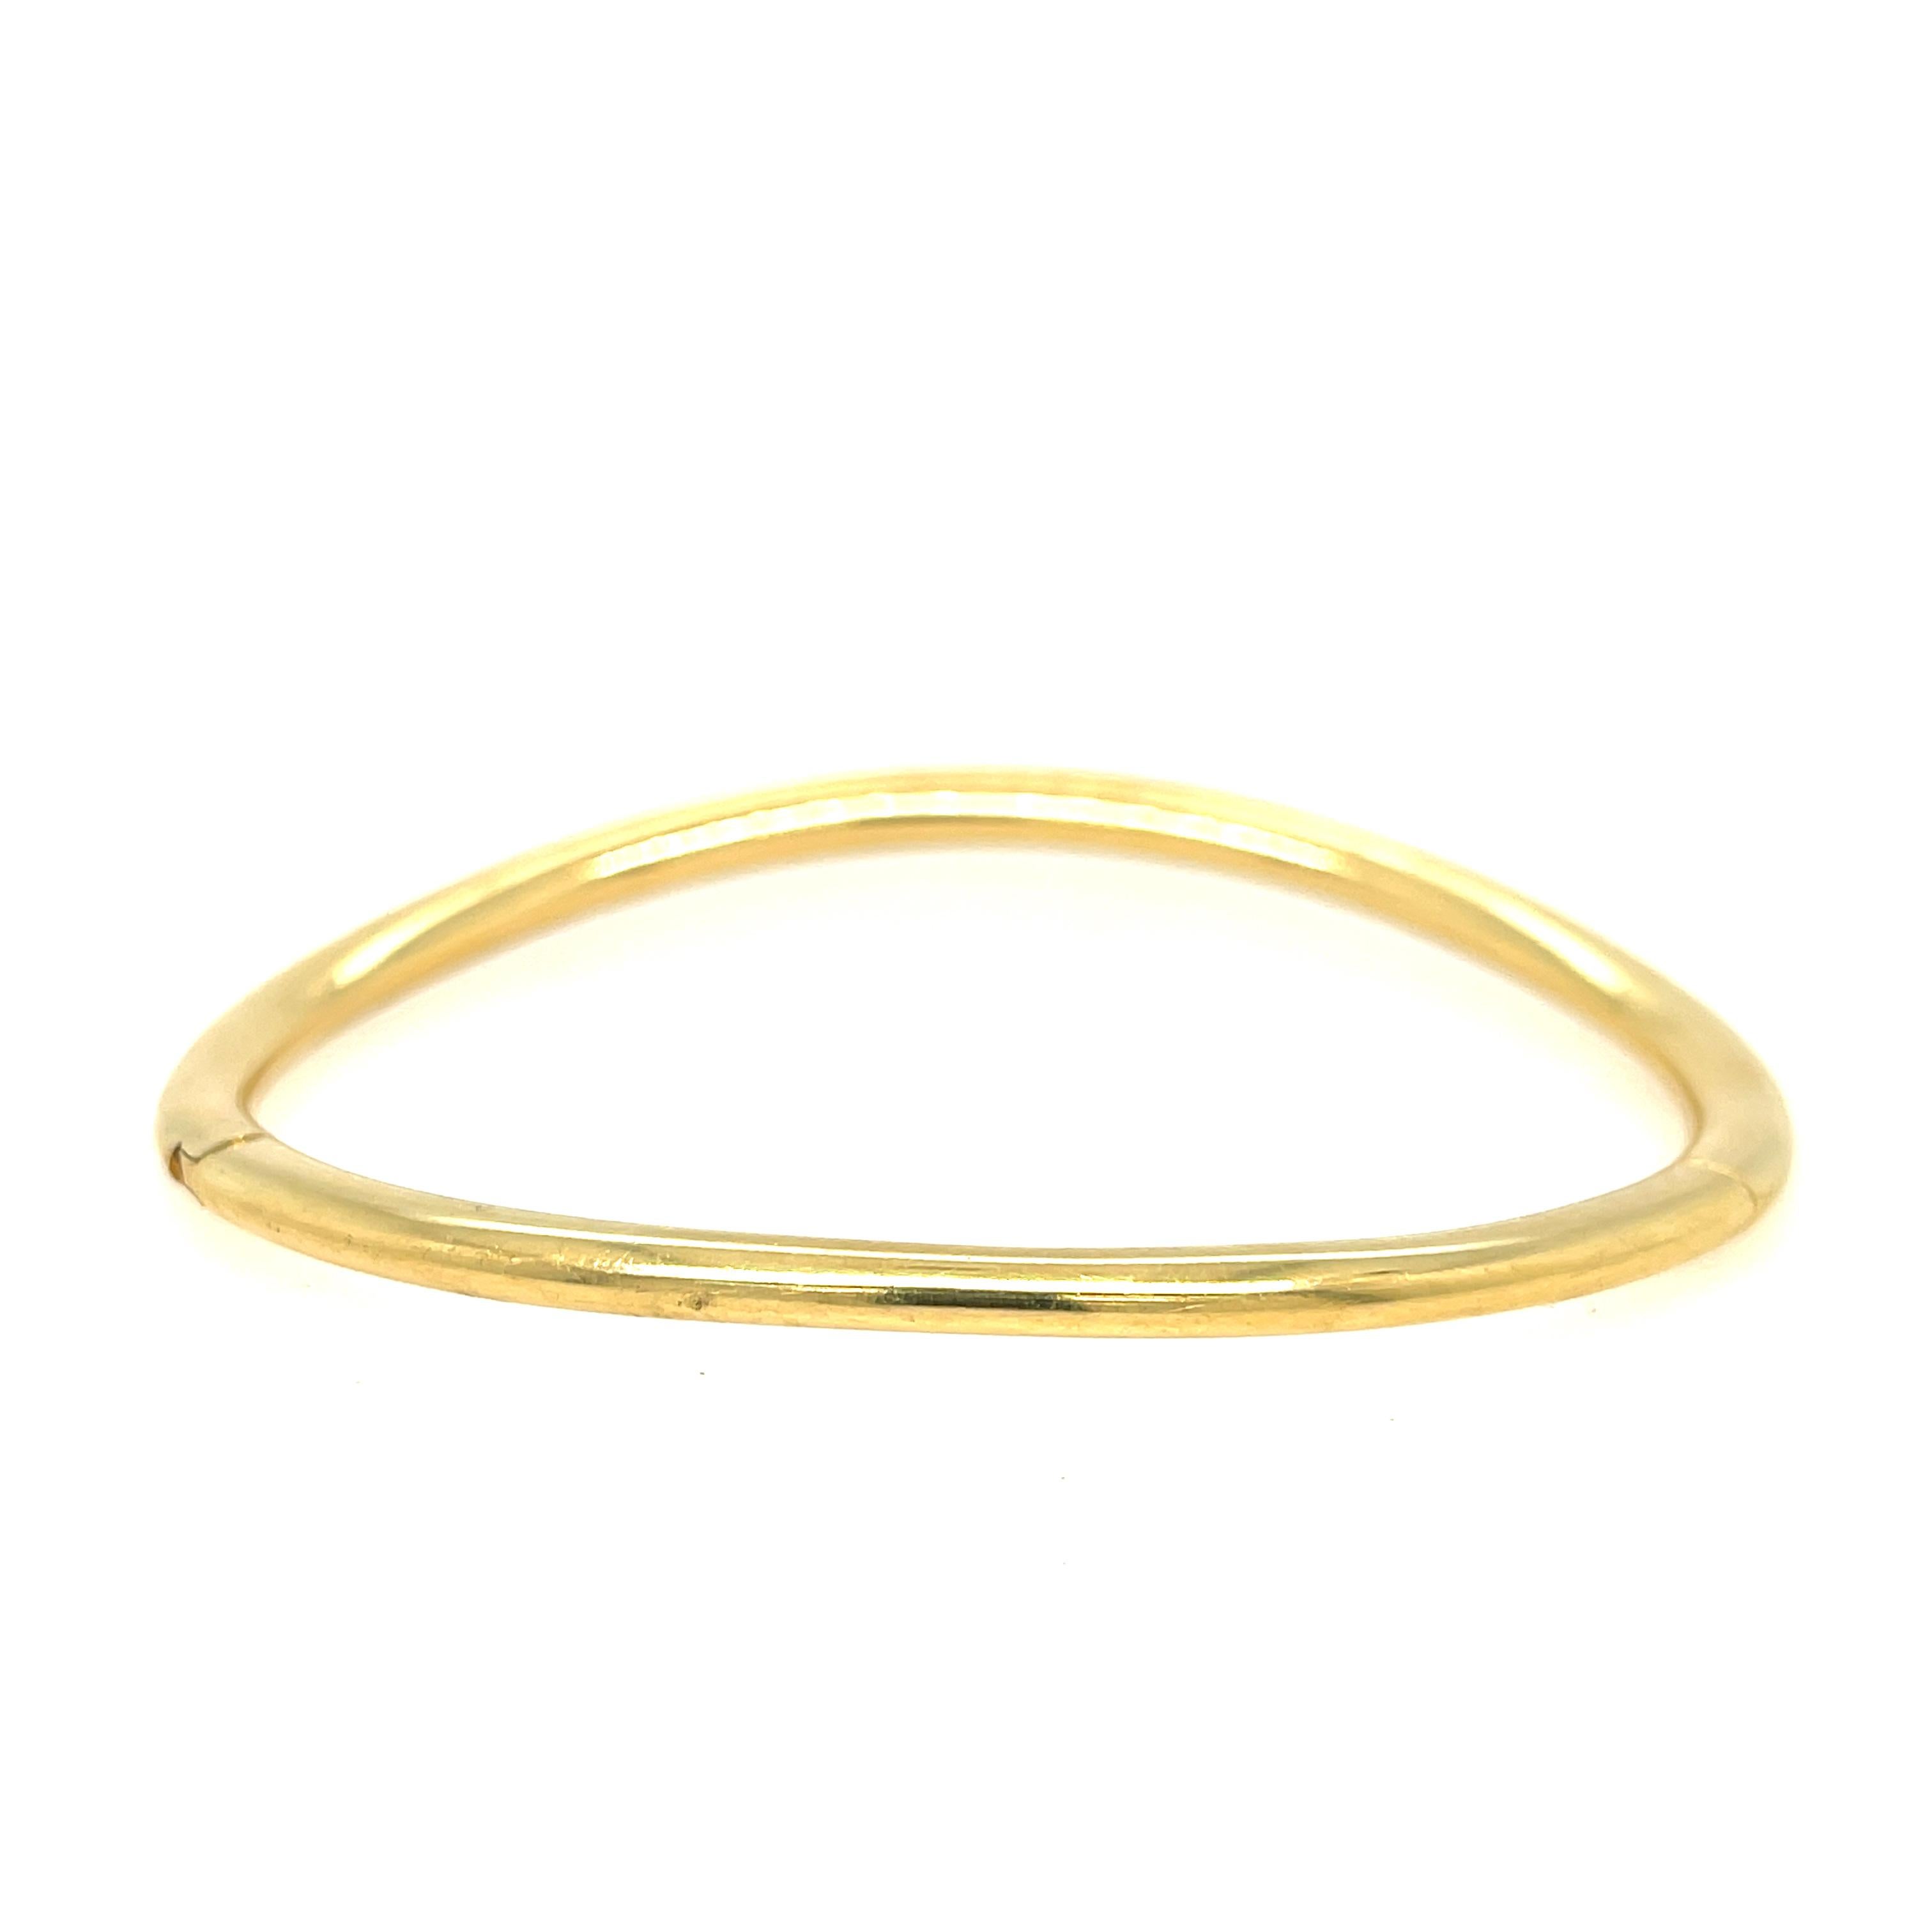 Diamond Wave Bangle in 18K Yellow Gold. The bangle feature 42 round diamonds with an approximate 1.05 ctw.  

circumference 6.5 inches
diameter 2.25 inches
3mm to 3.9mm wide
30.9 grams